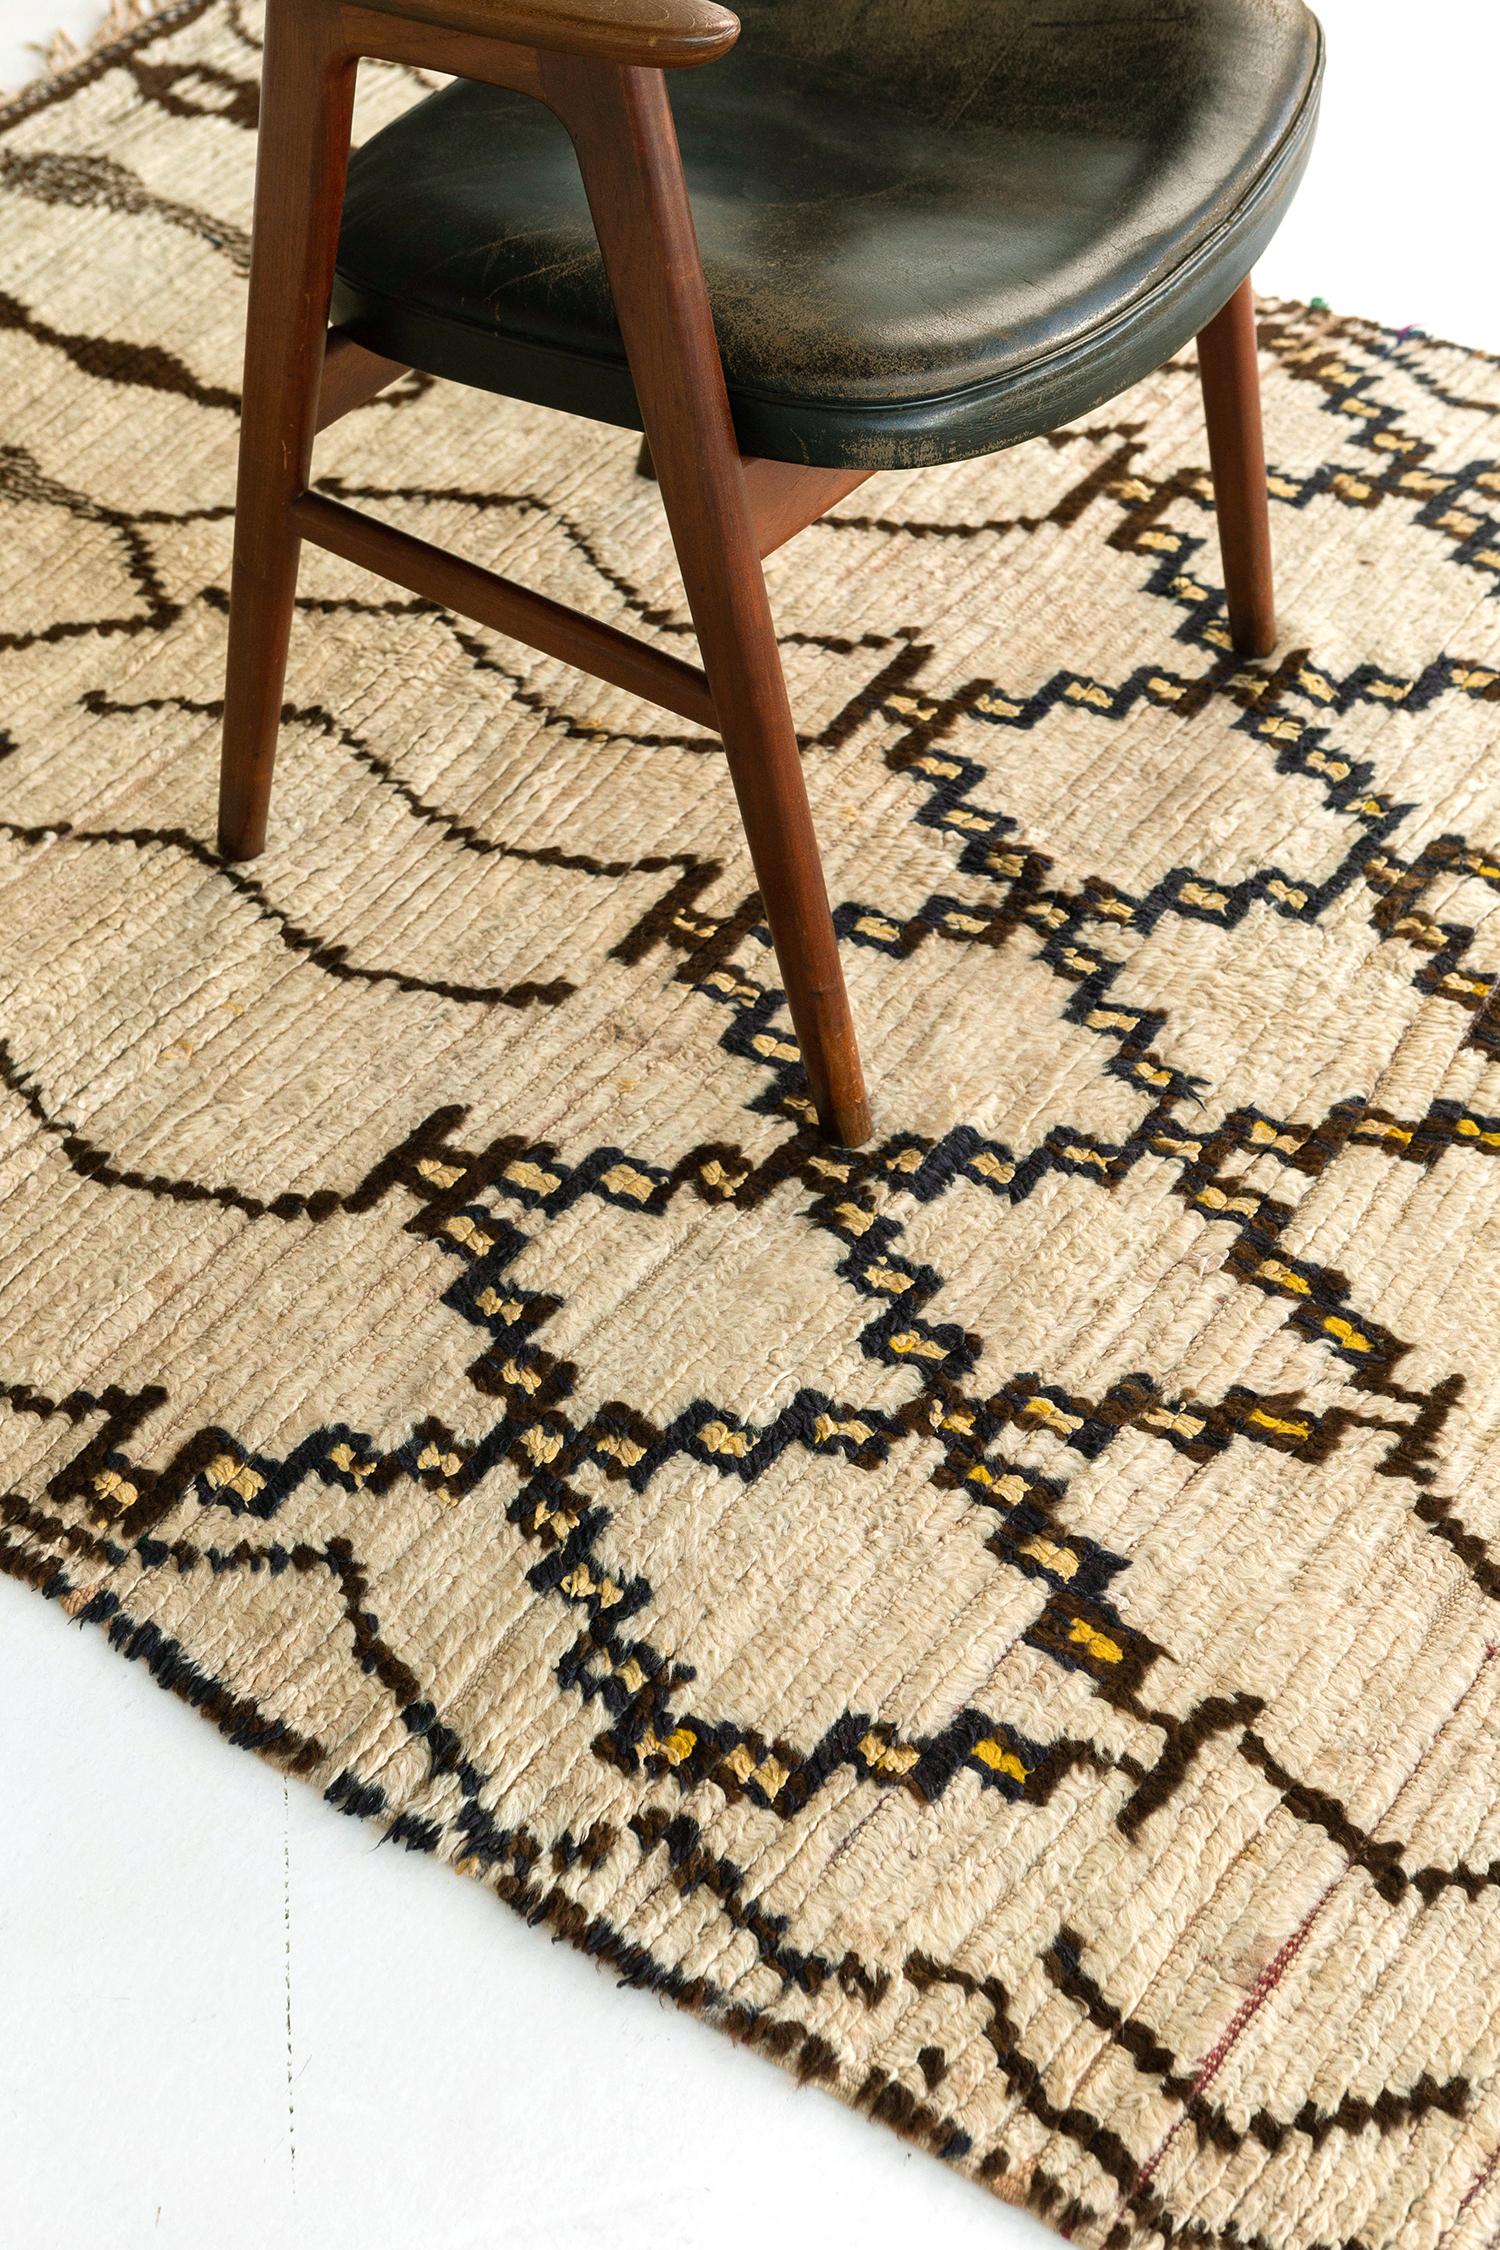 Ivory pile field with pattern elements in dark brown and deep charcoal wools. Large scale motifs including zigzags and stacked diamonds are organized in five horizontal bands, with a sense of symmetry and balance along the vertical axis. Slight